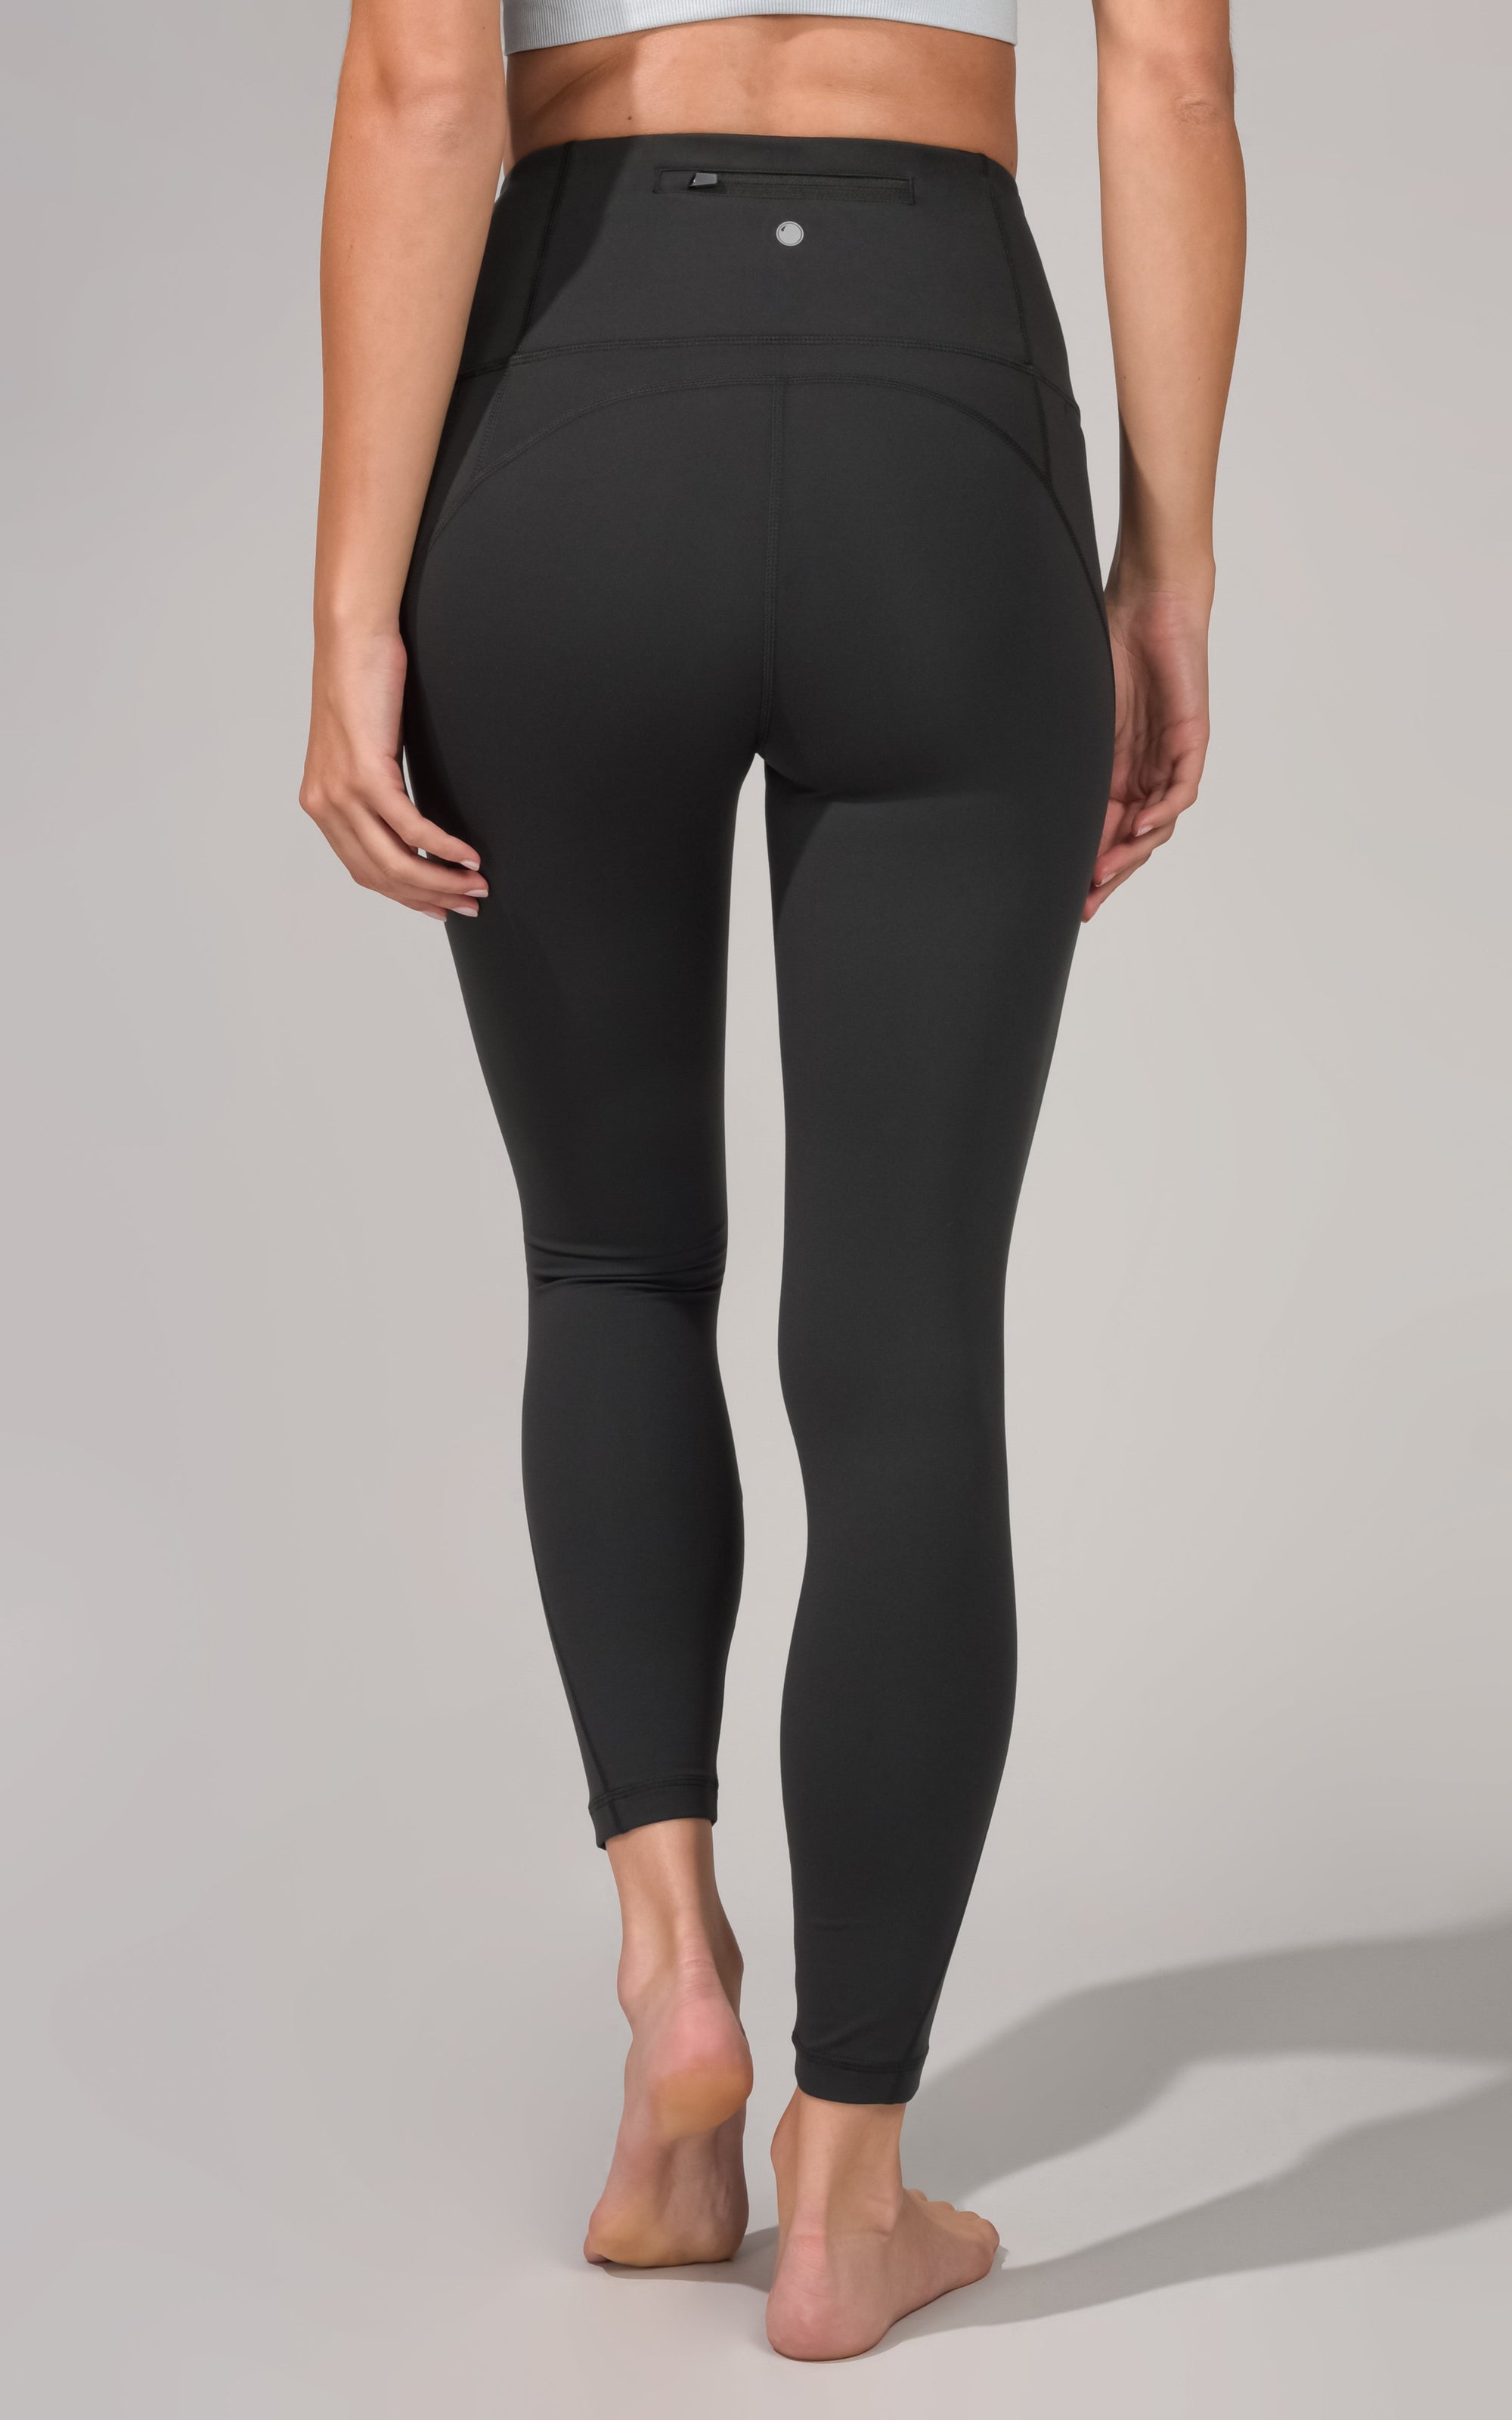 Yogalicious NEW Black High Rise 7/8 Ankle Leggings Pockets S